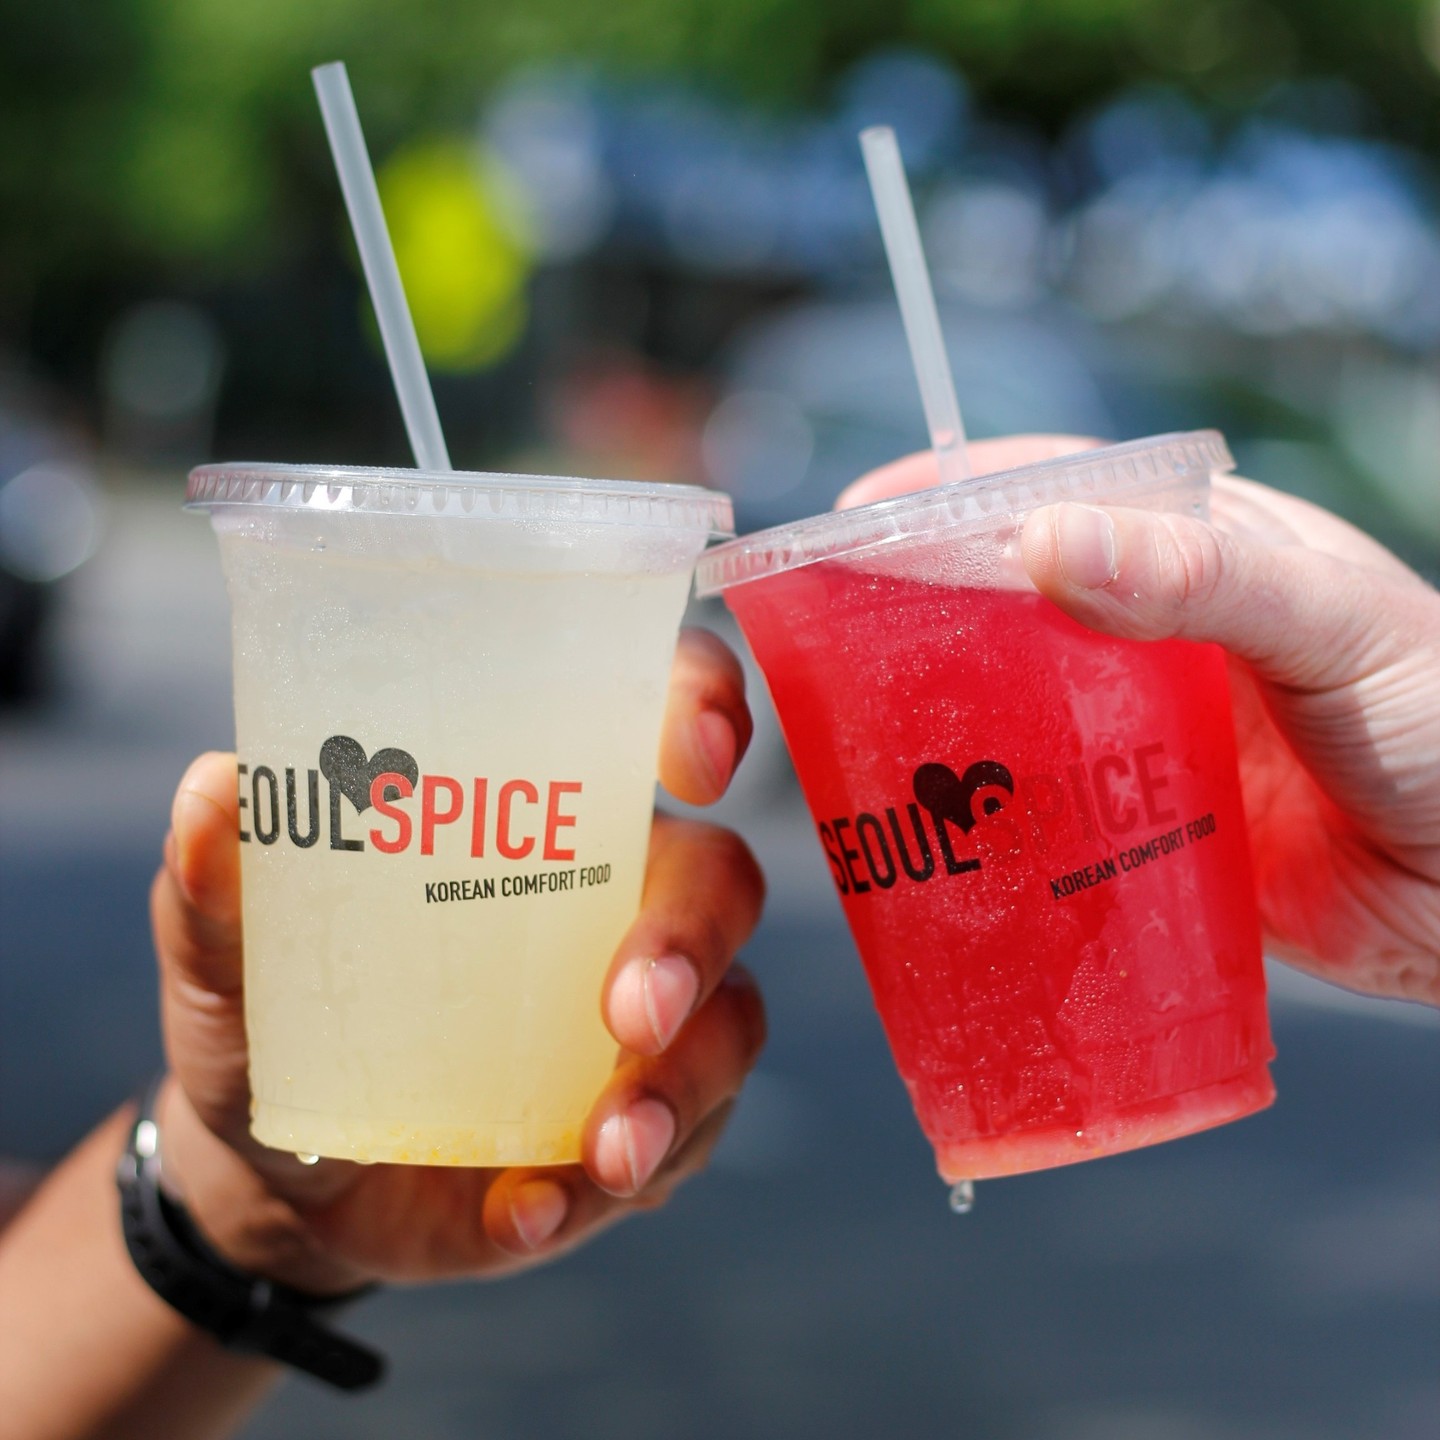 two iced drinks with student discounts. Photo via @tenleytownms